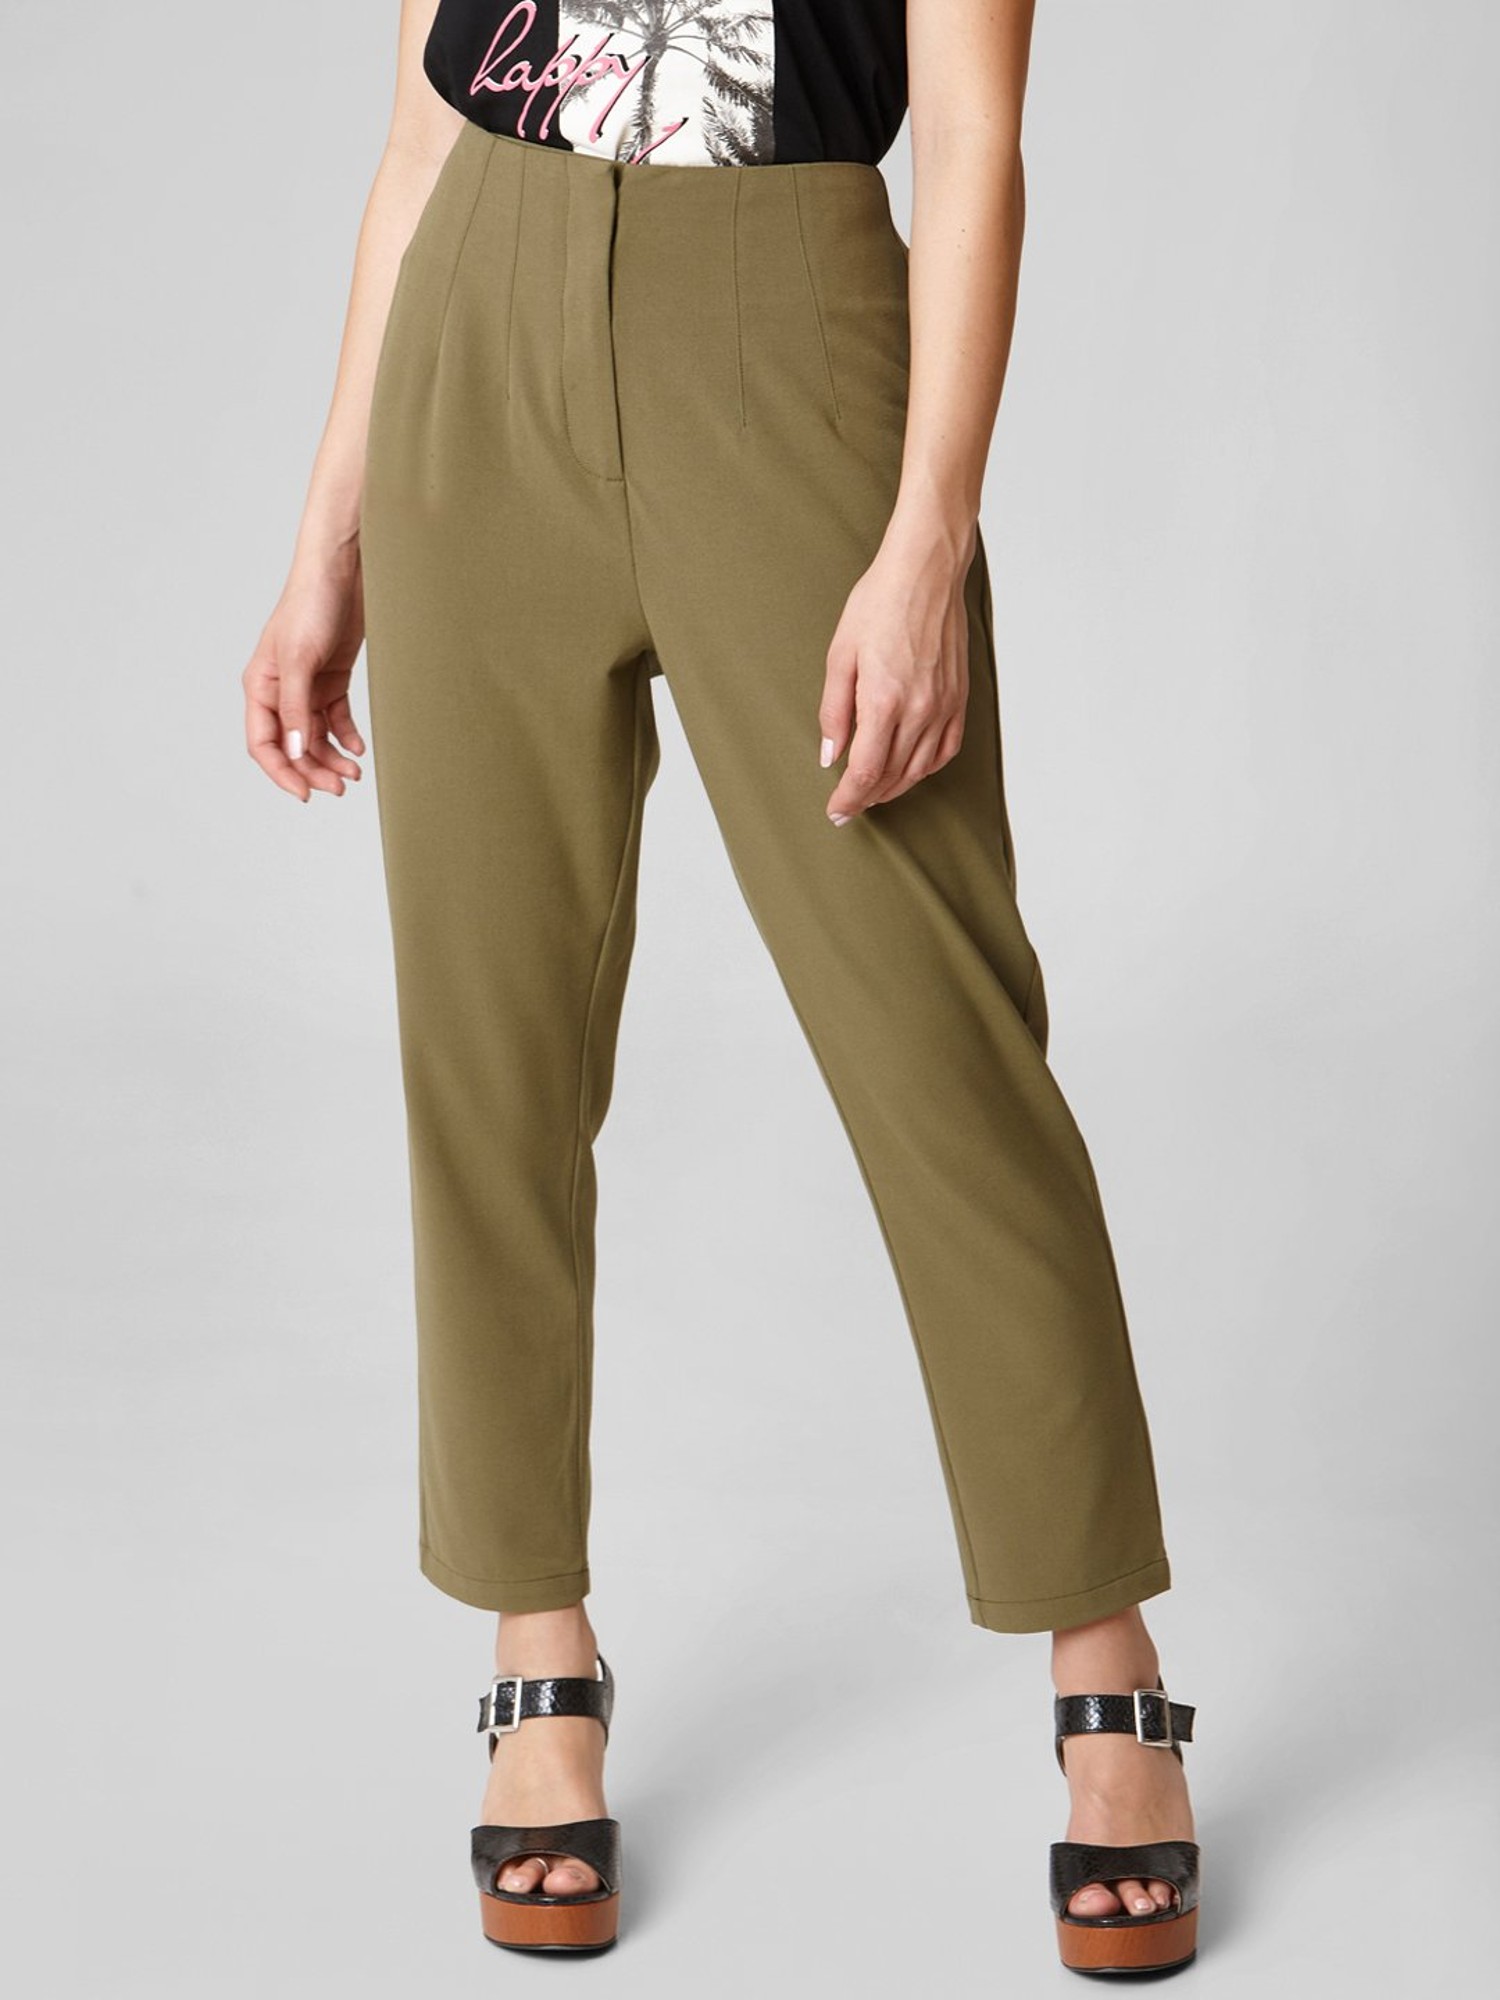 Womens Green Pants  Explore our New Arrivals  ZARA United States